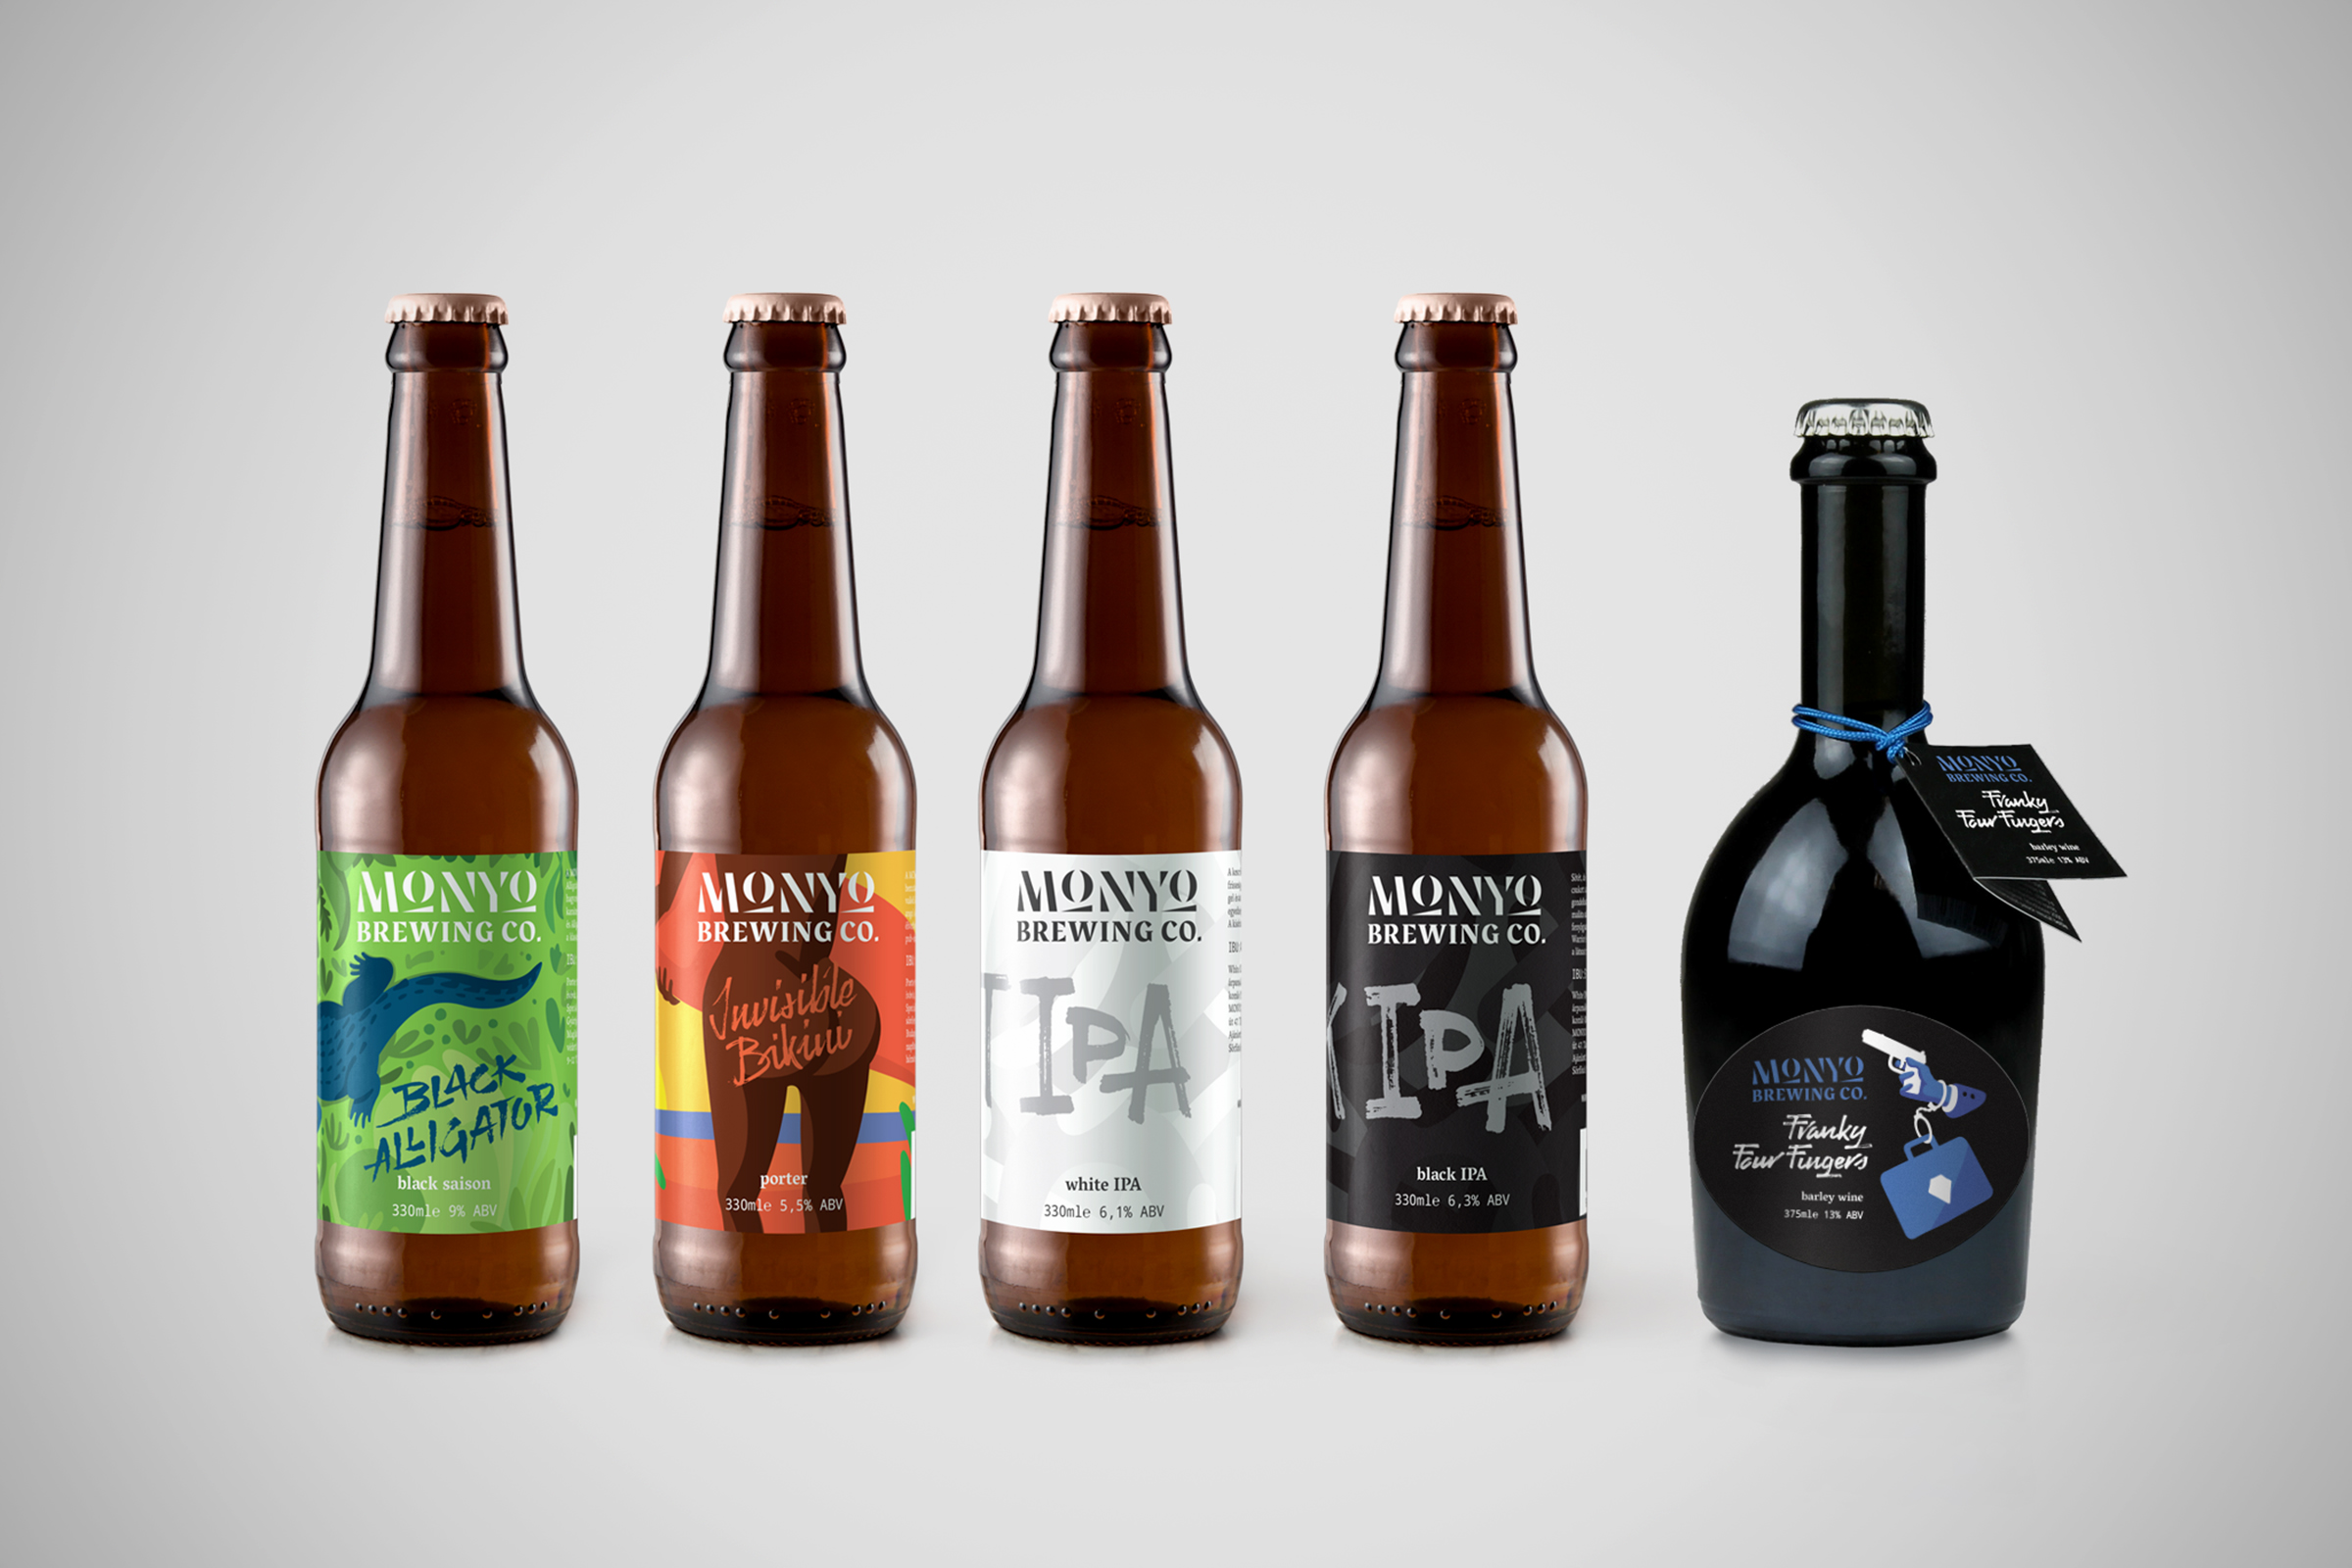 Check Out The Dynamic Packaging For These Brews